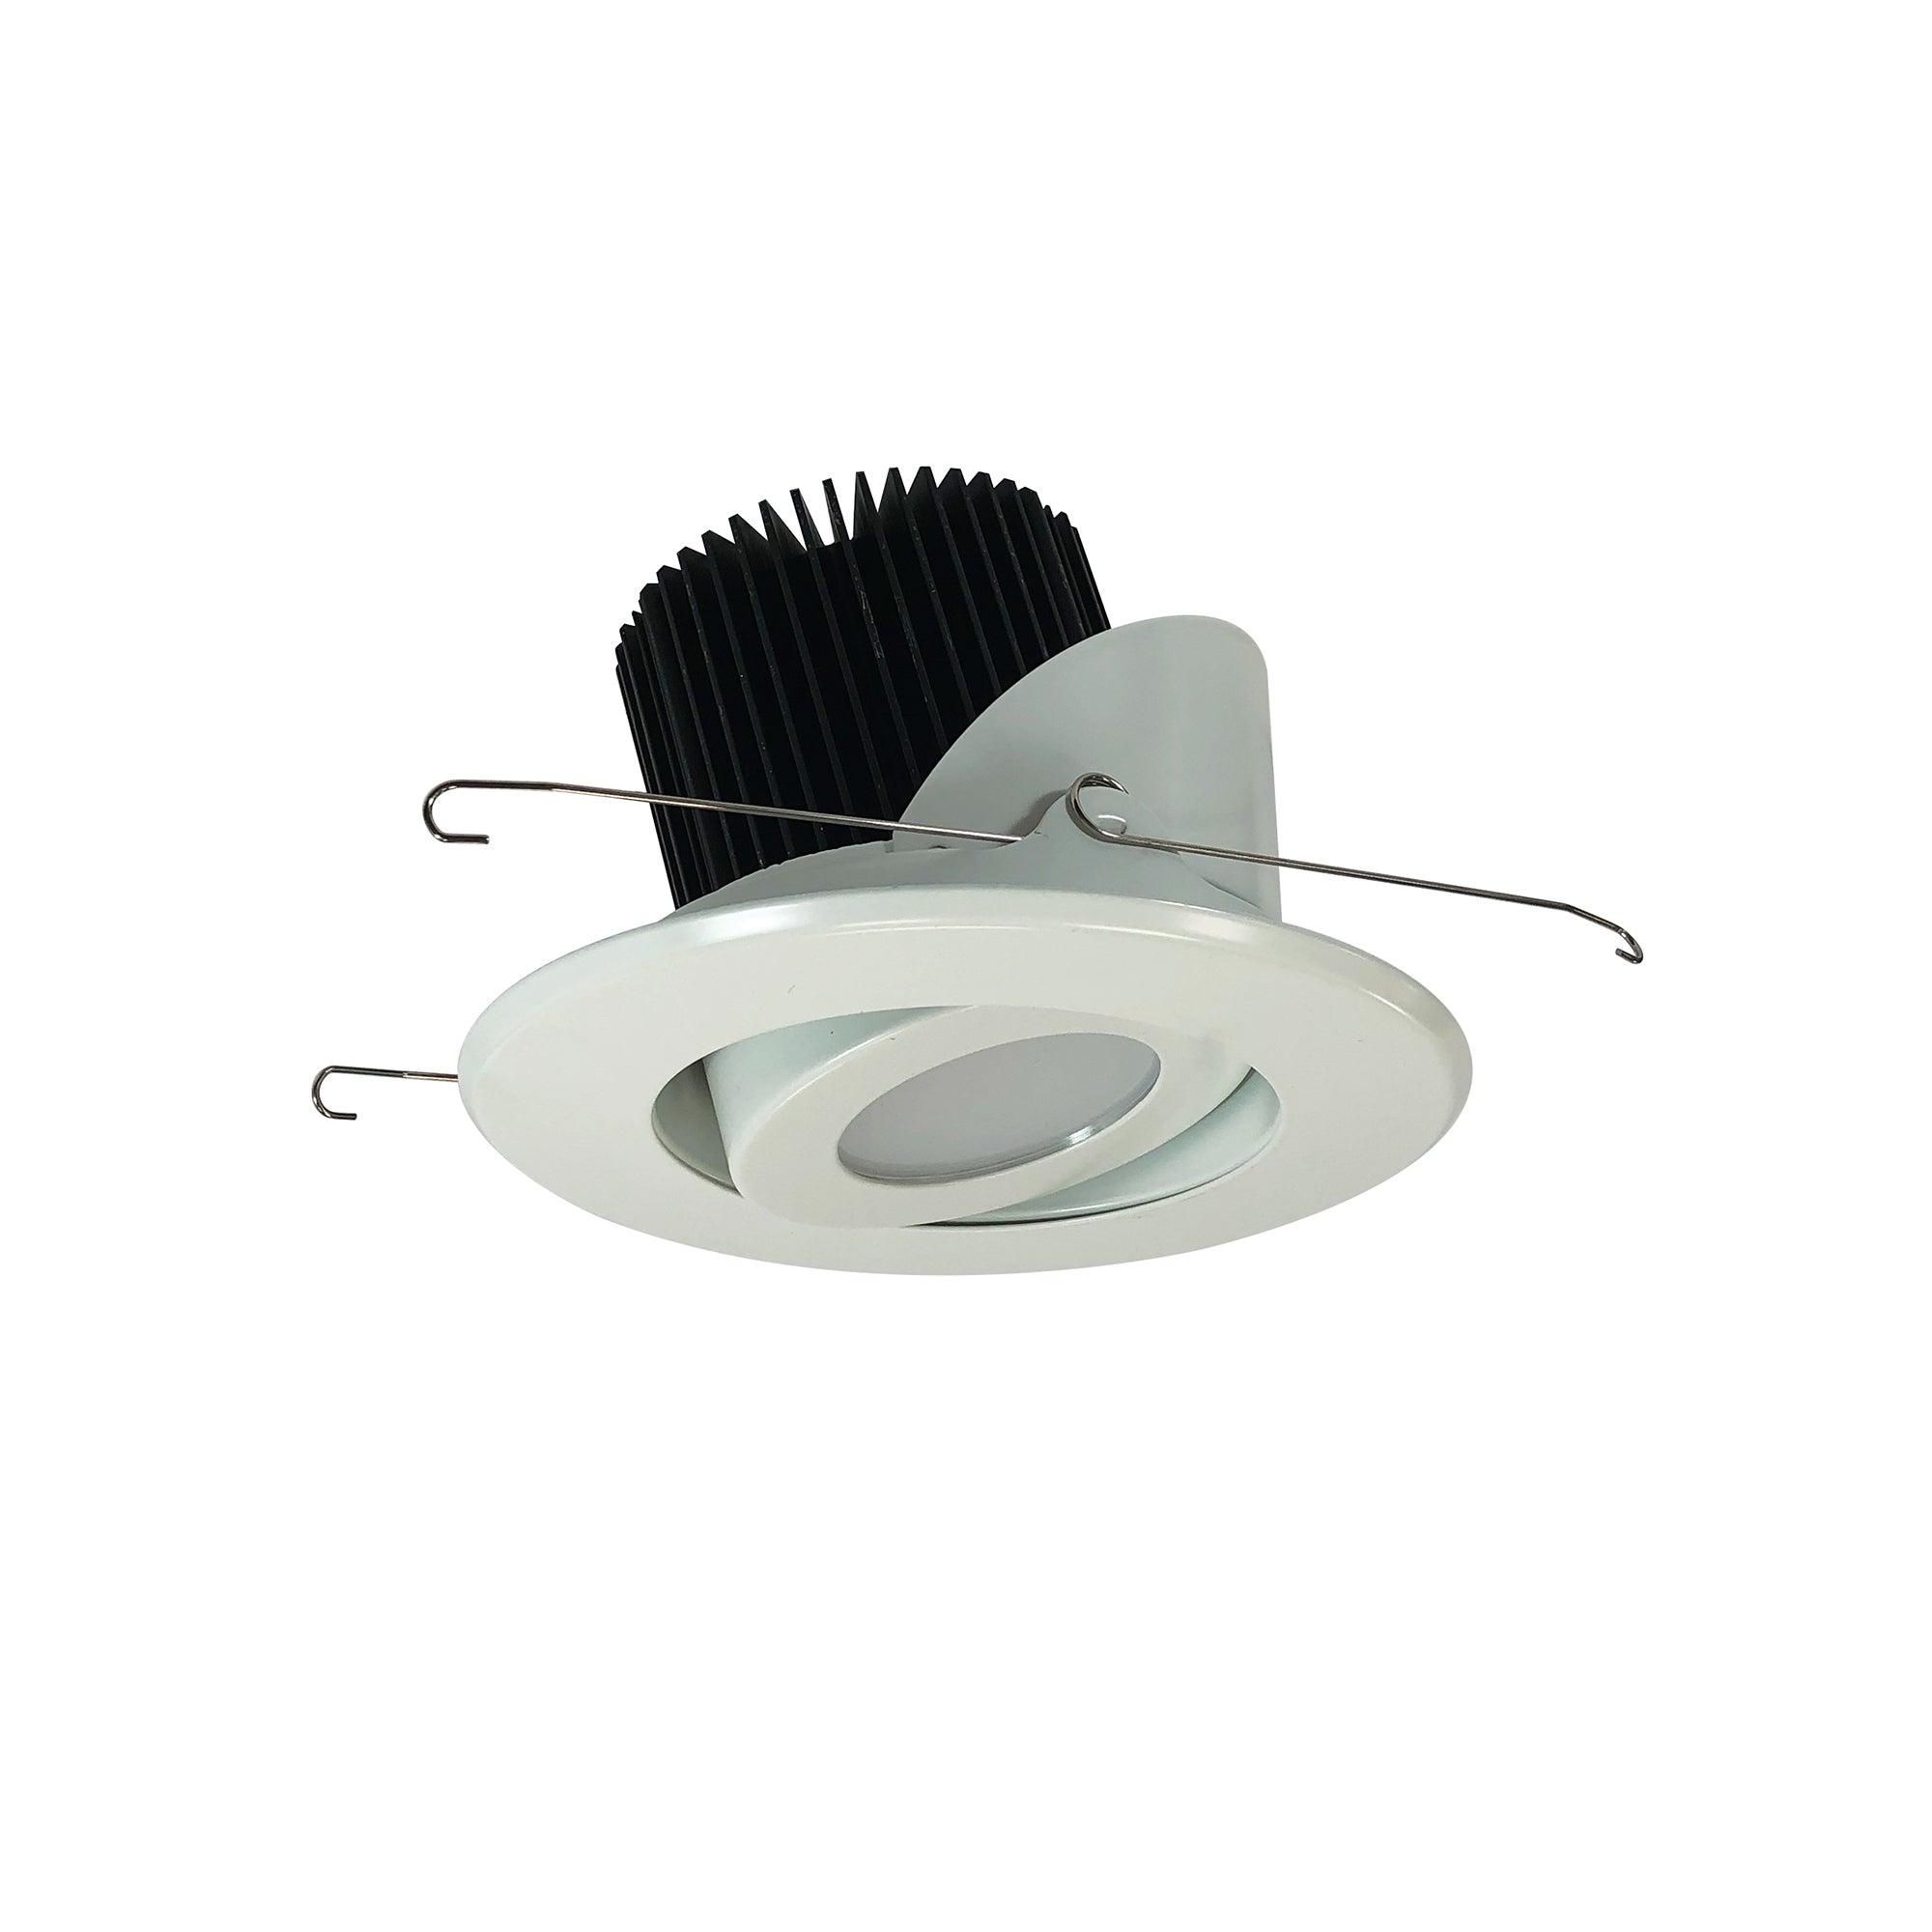 Nora Lighting LE70 - NRM2-514L2540MWW - Recessed - White